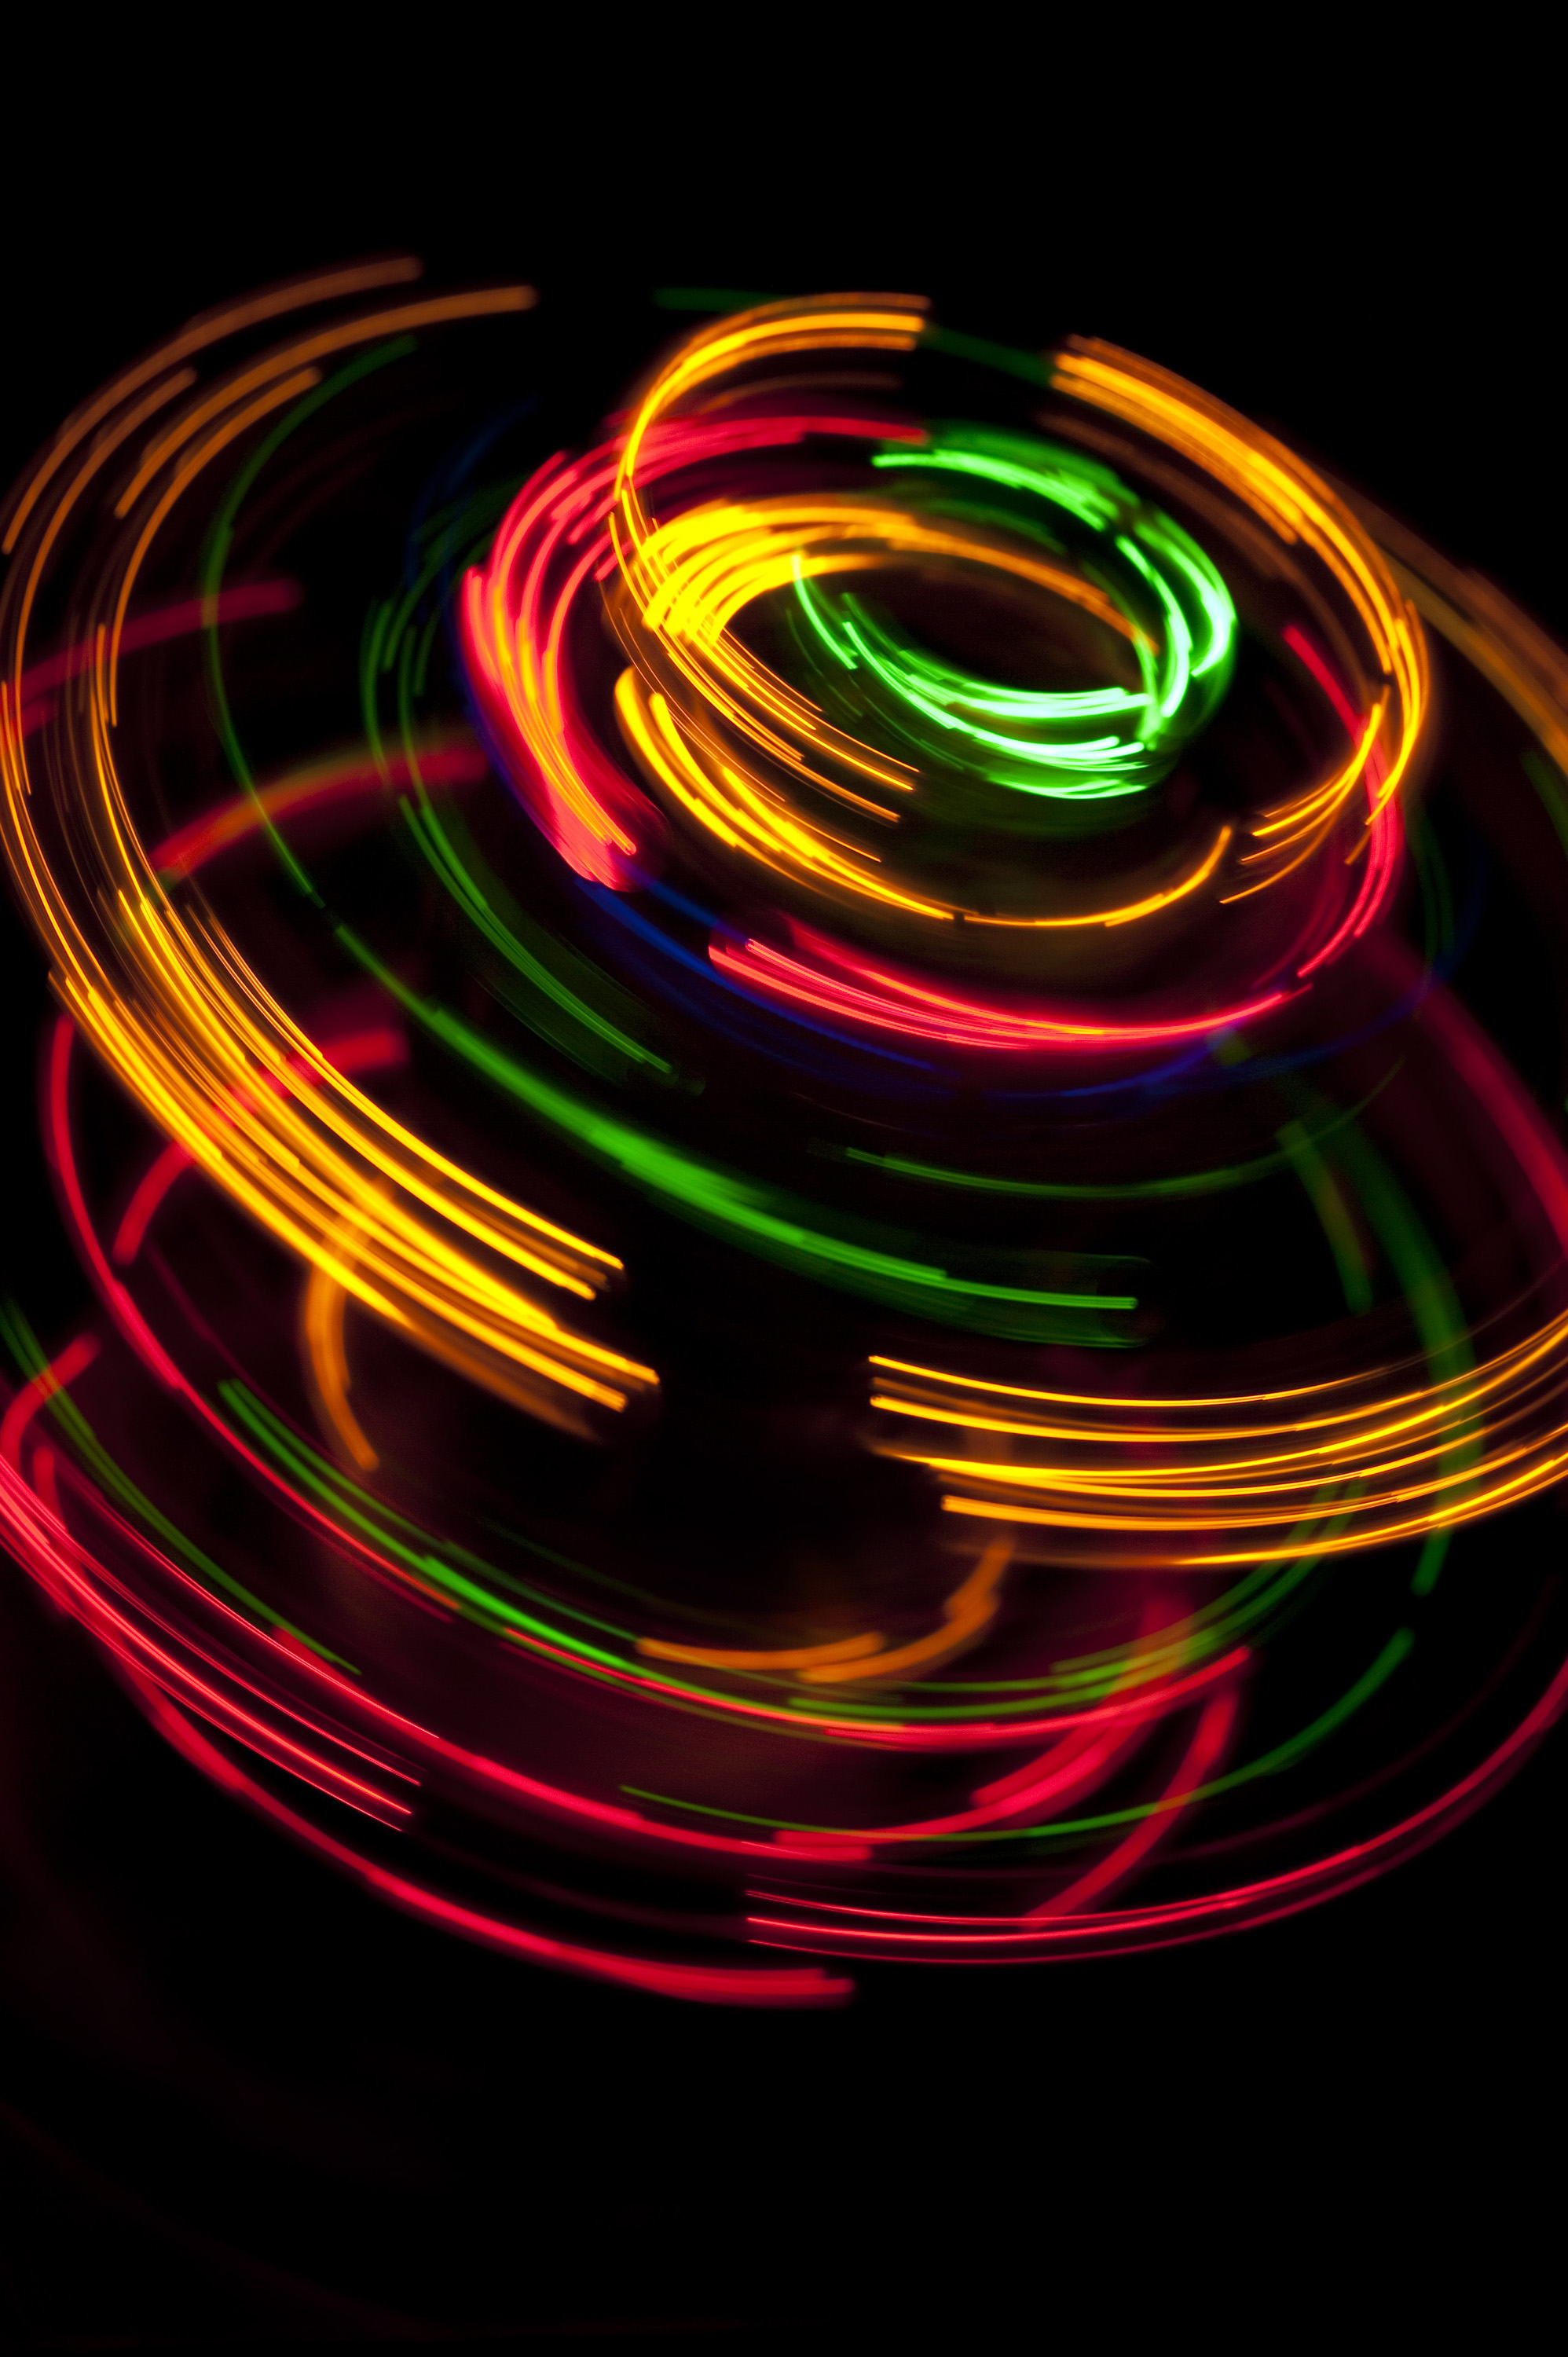 spinning light effect | Free backgrounds and textures | Cr103.com